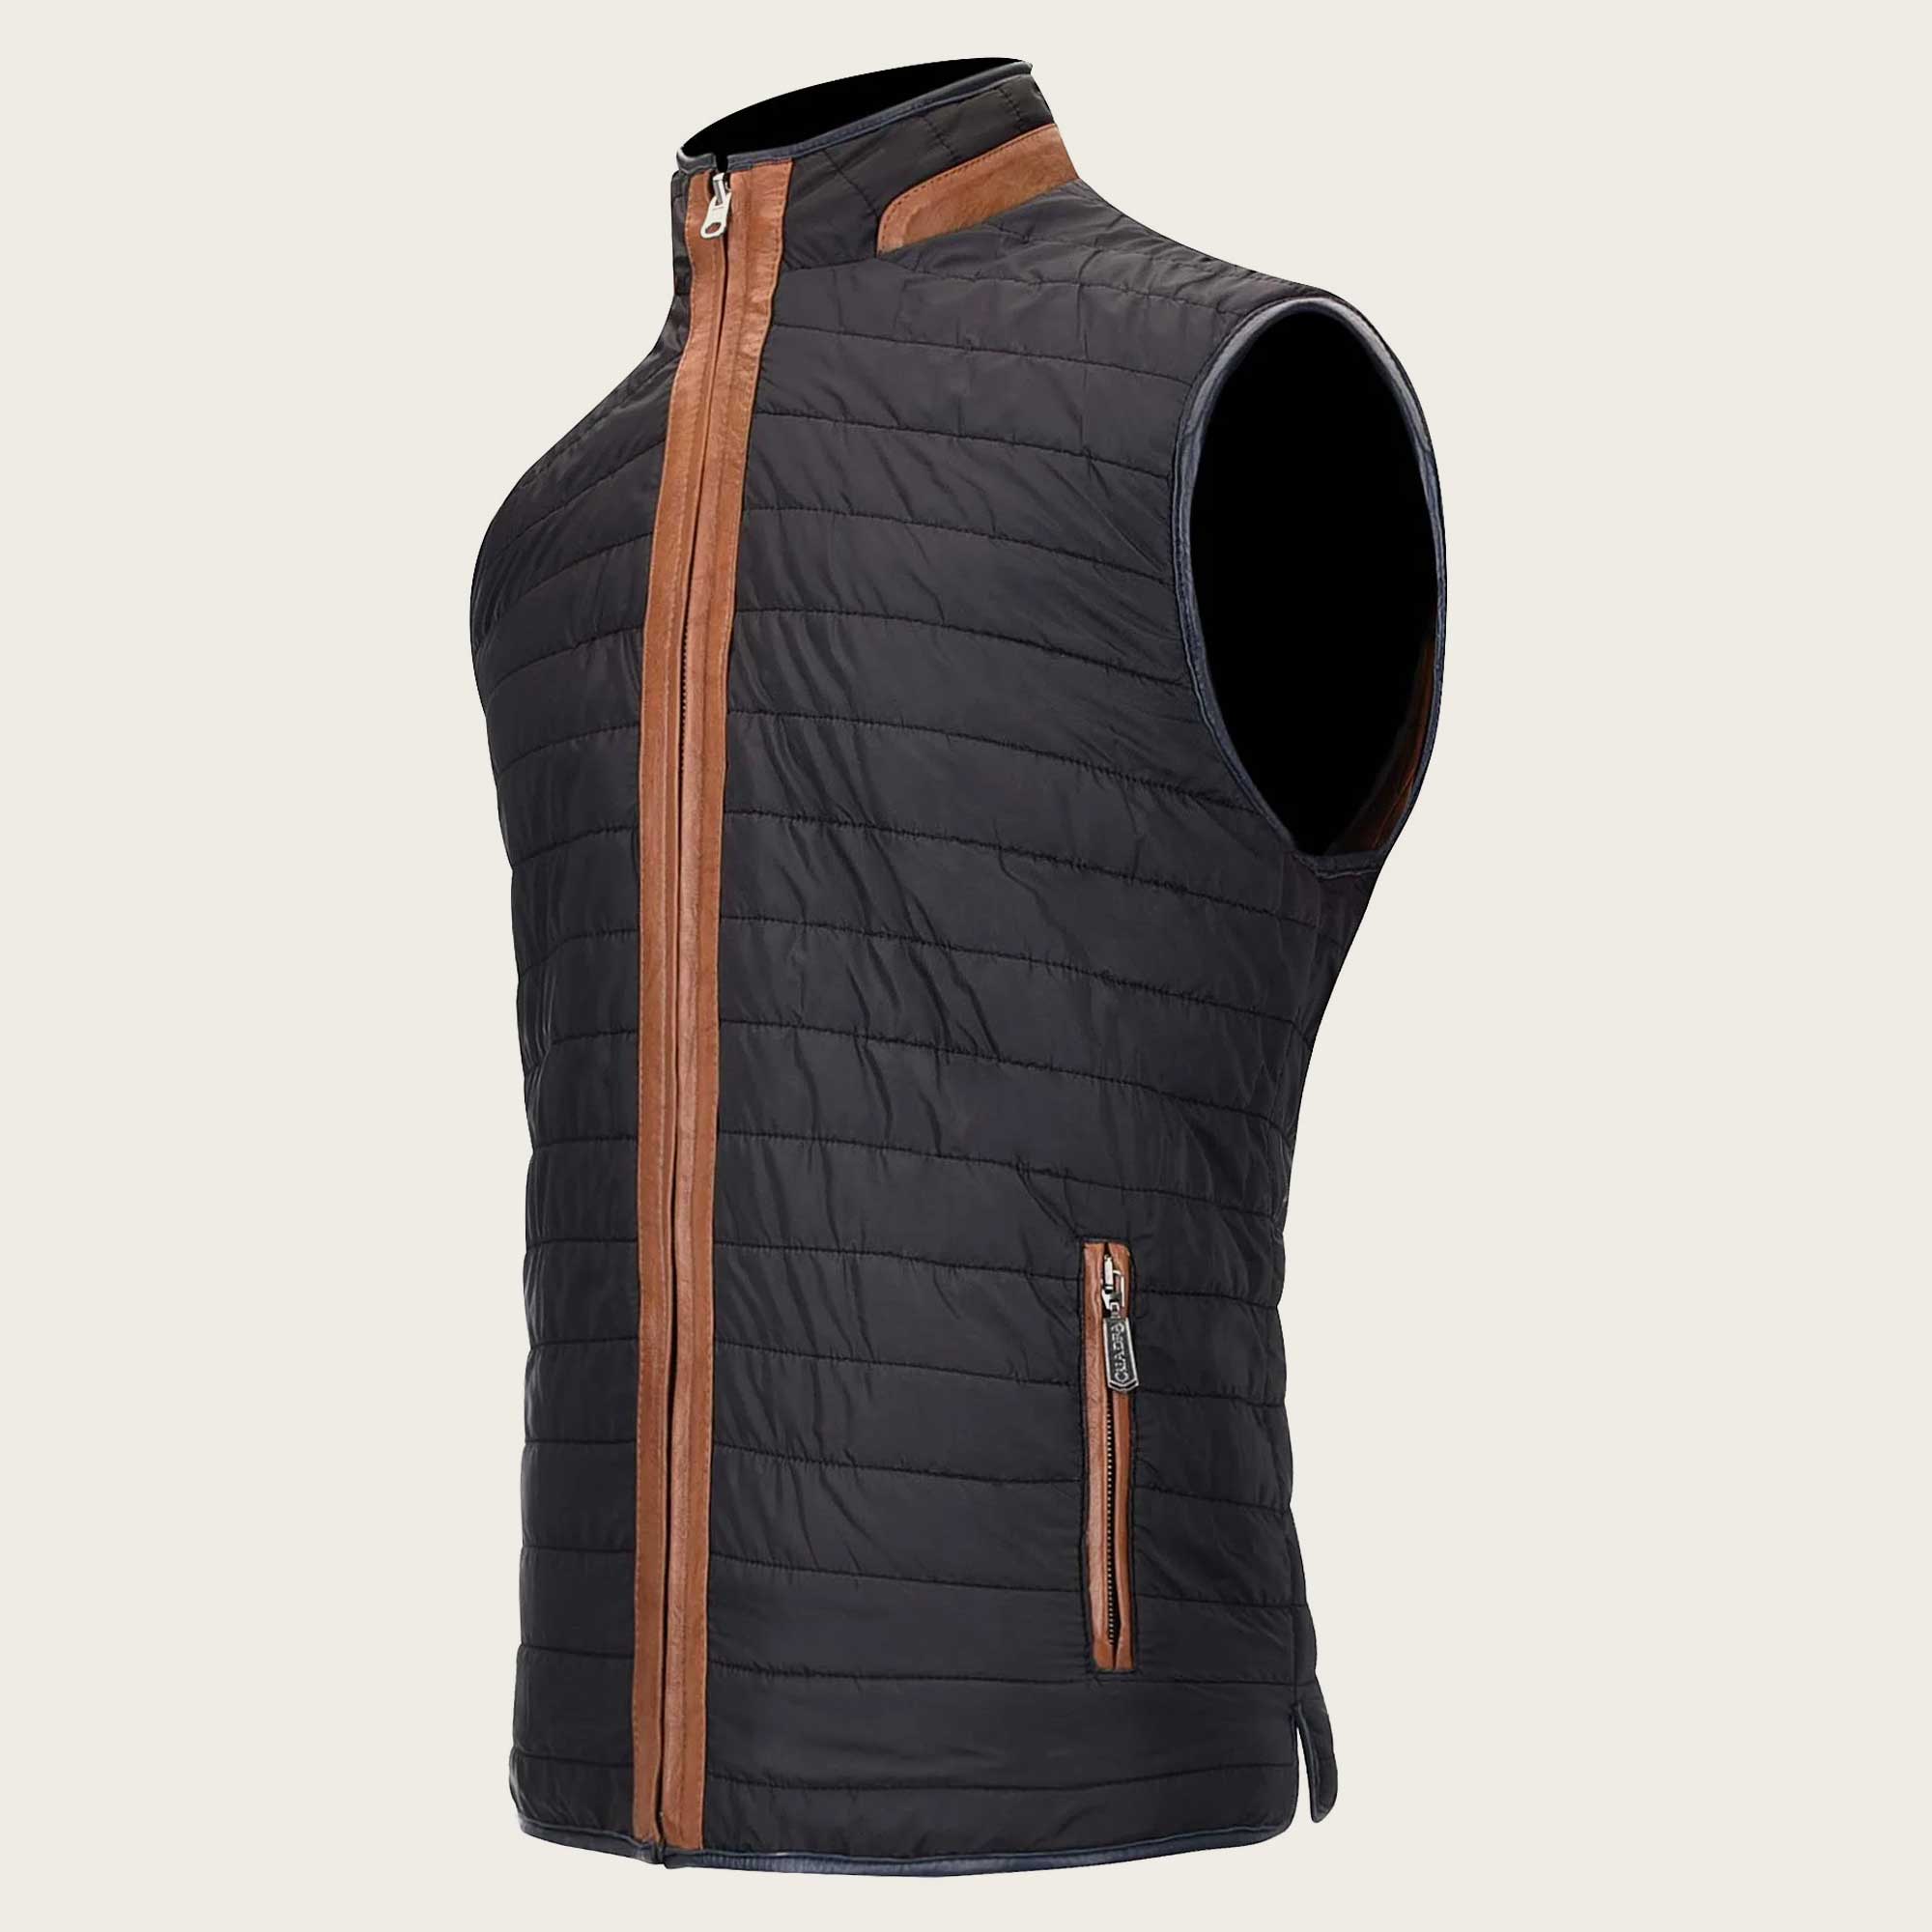 Embroidered honey leather reversible vest